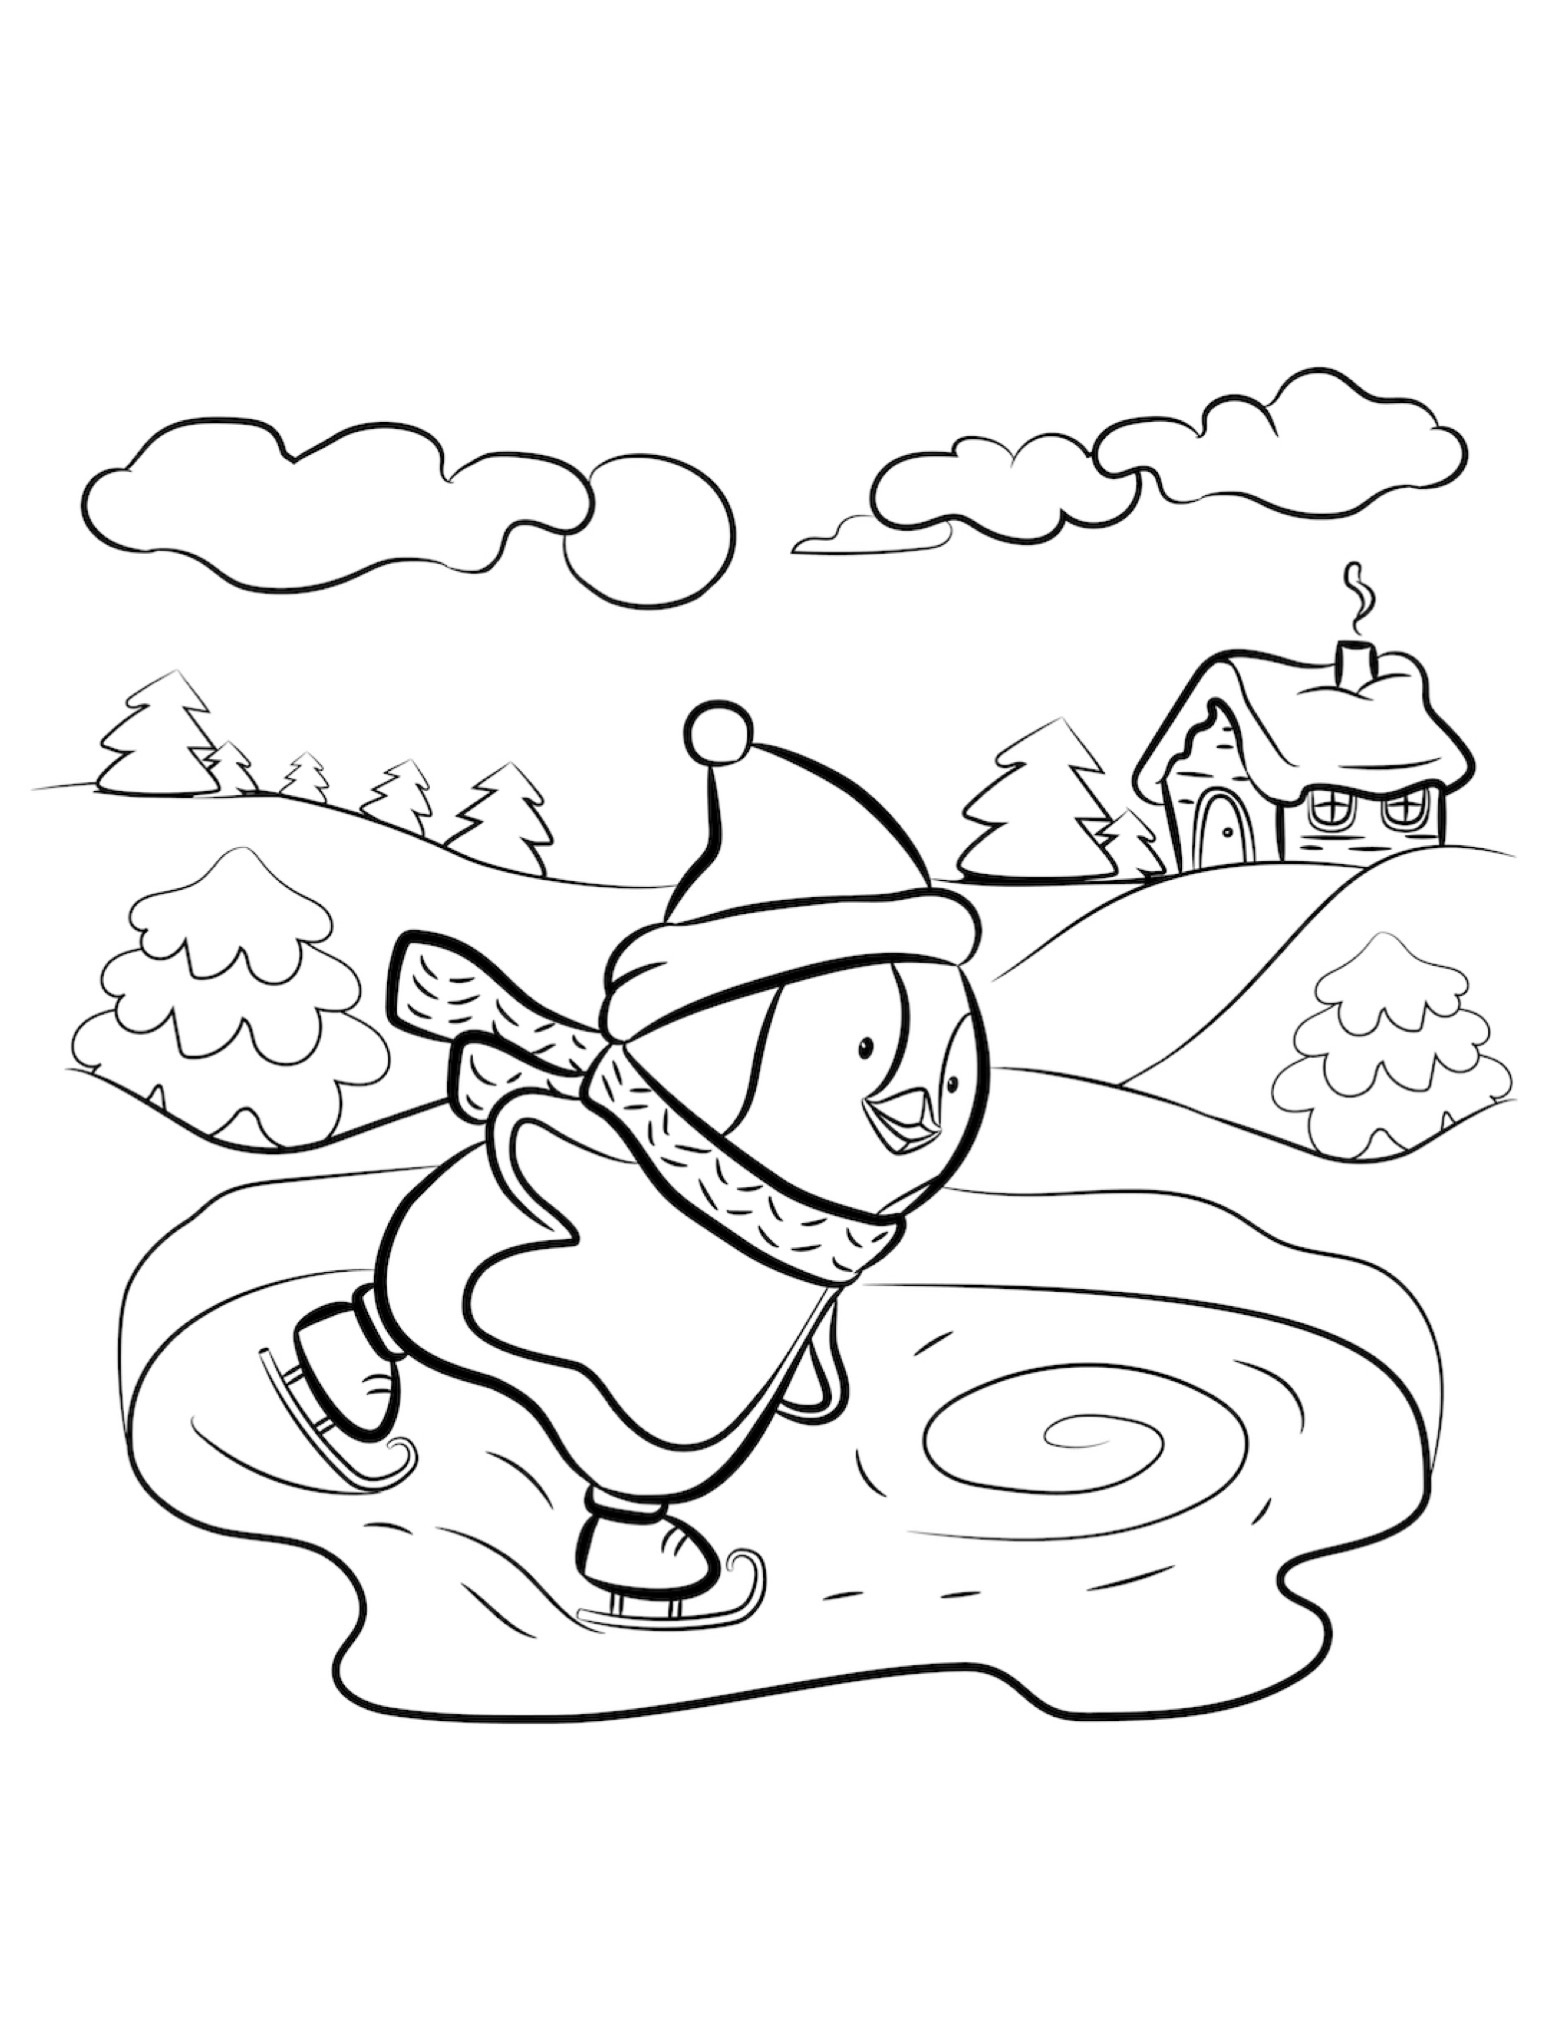 ice skating animals coloring pages